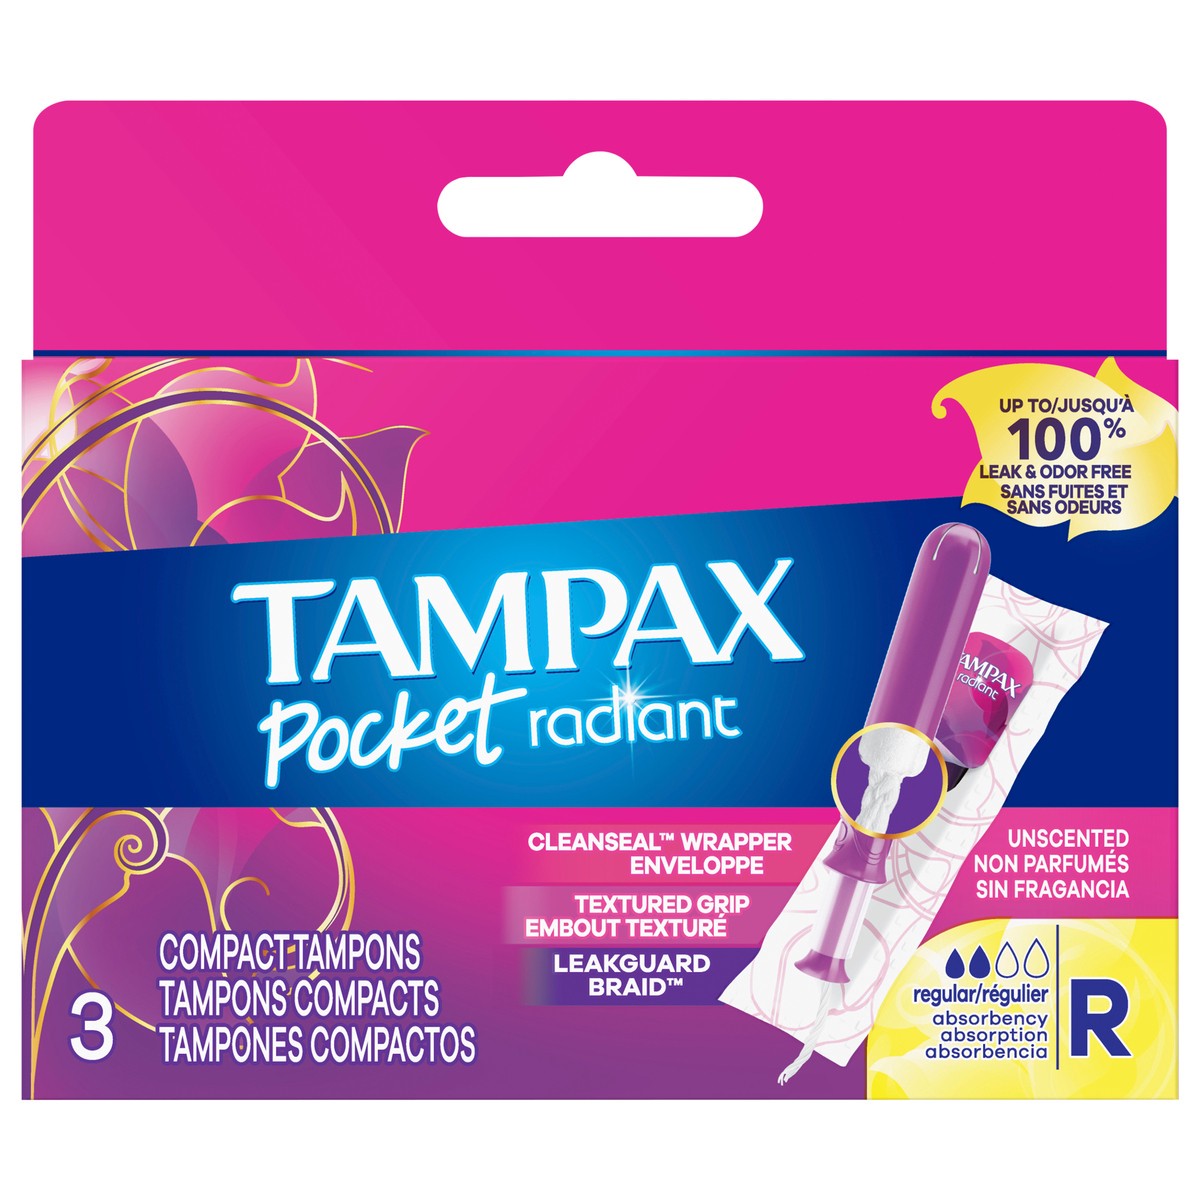 slide 1 of 7, Tampax Pocket Radiant Compact Plastic Tampons, With LeakGuard Braid, Regular Absorbency, Unscented, 3 Count, 3 ct